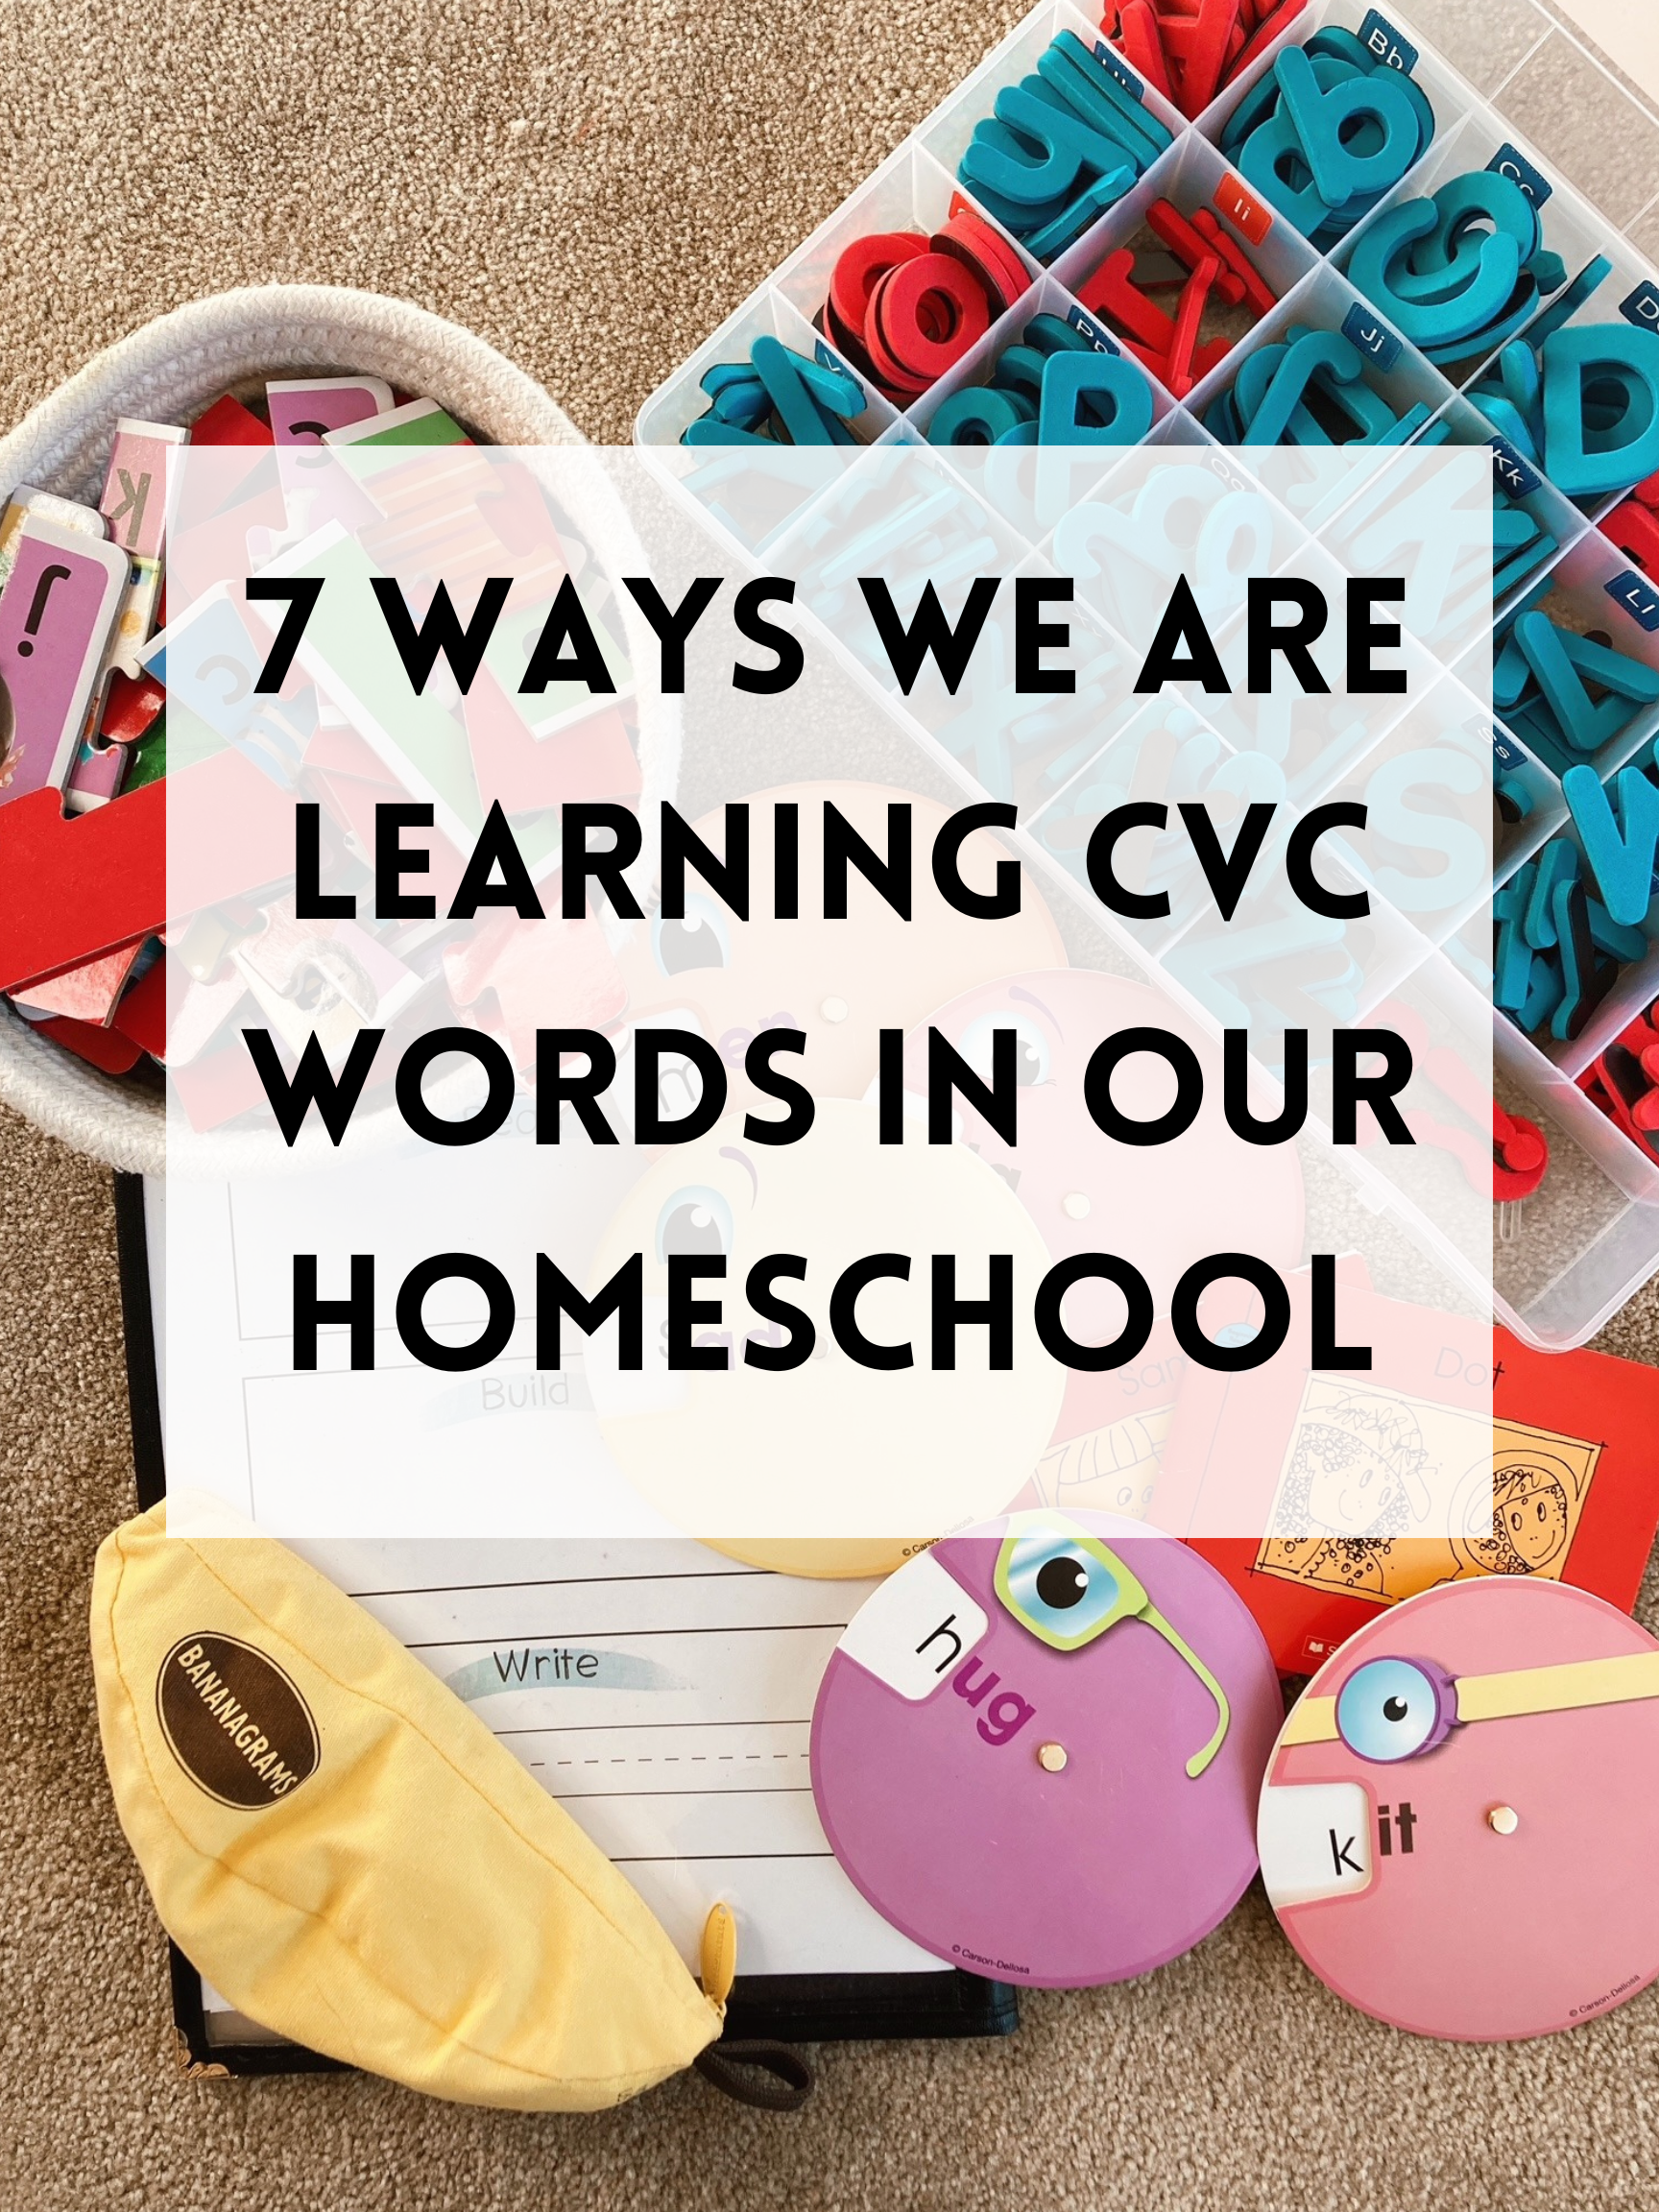 7 Ways We Are Learning CVC Words in Our Homeschool